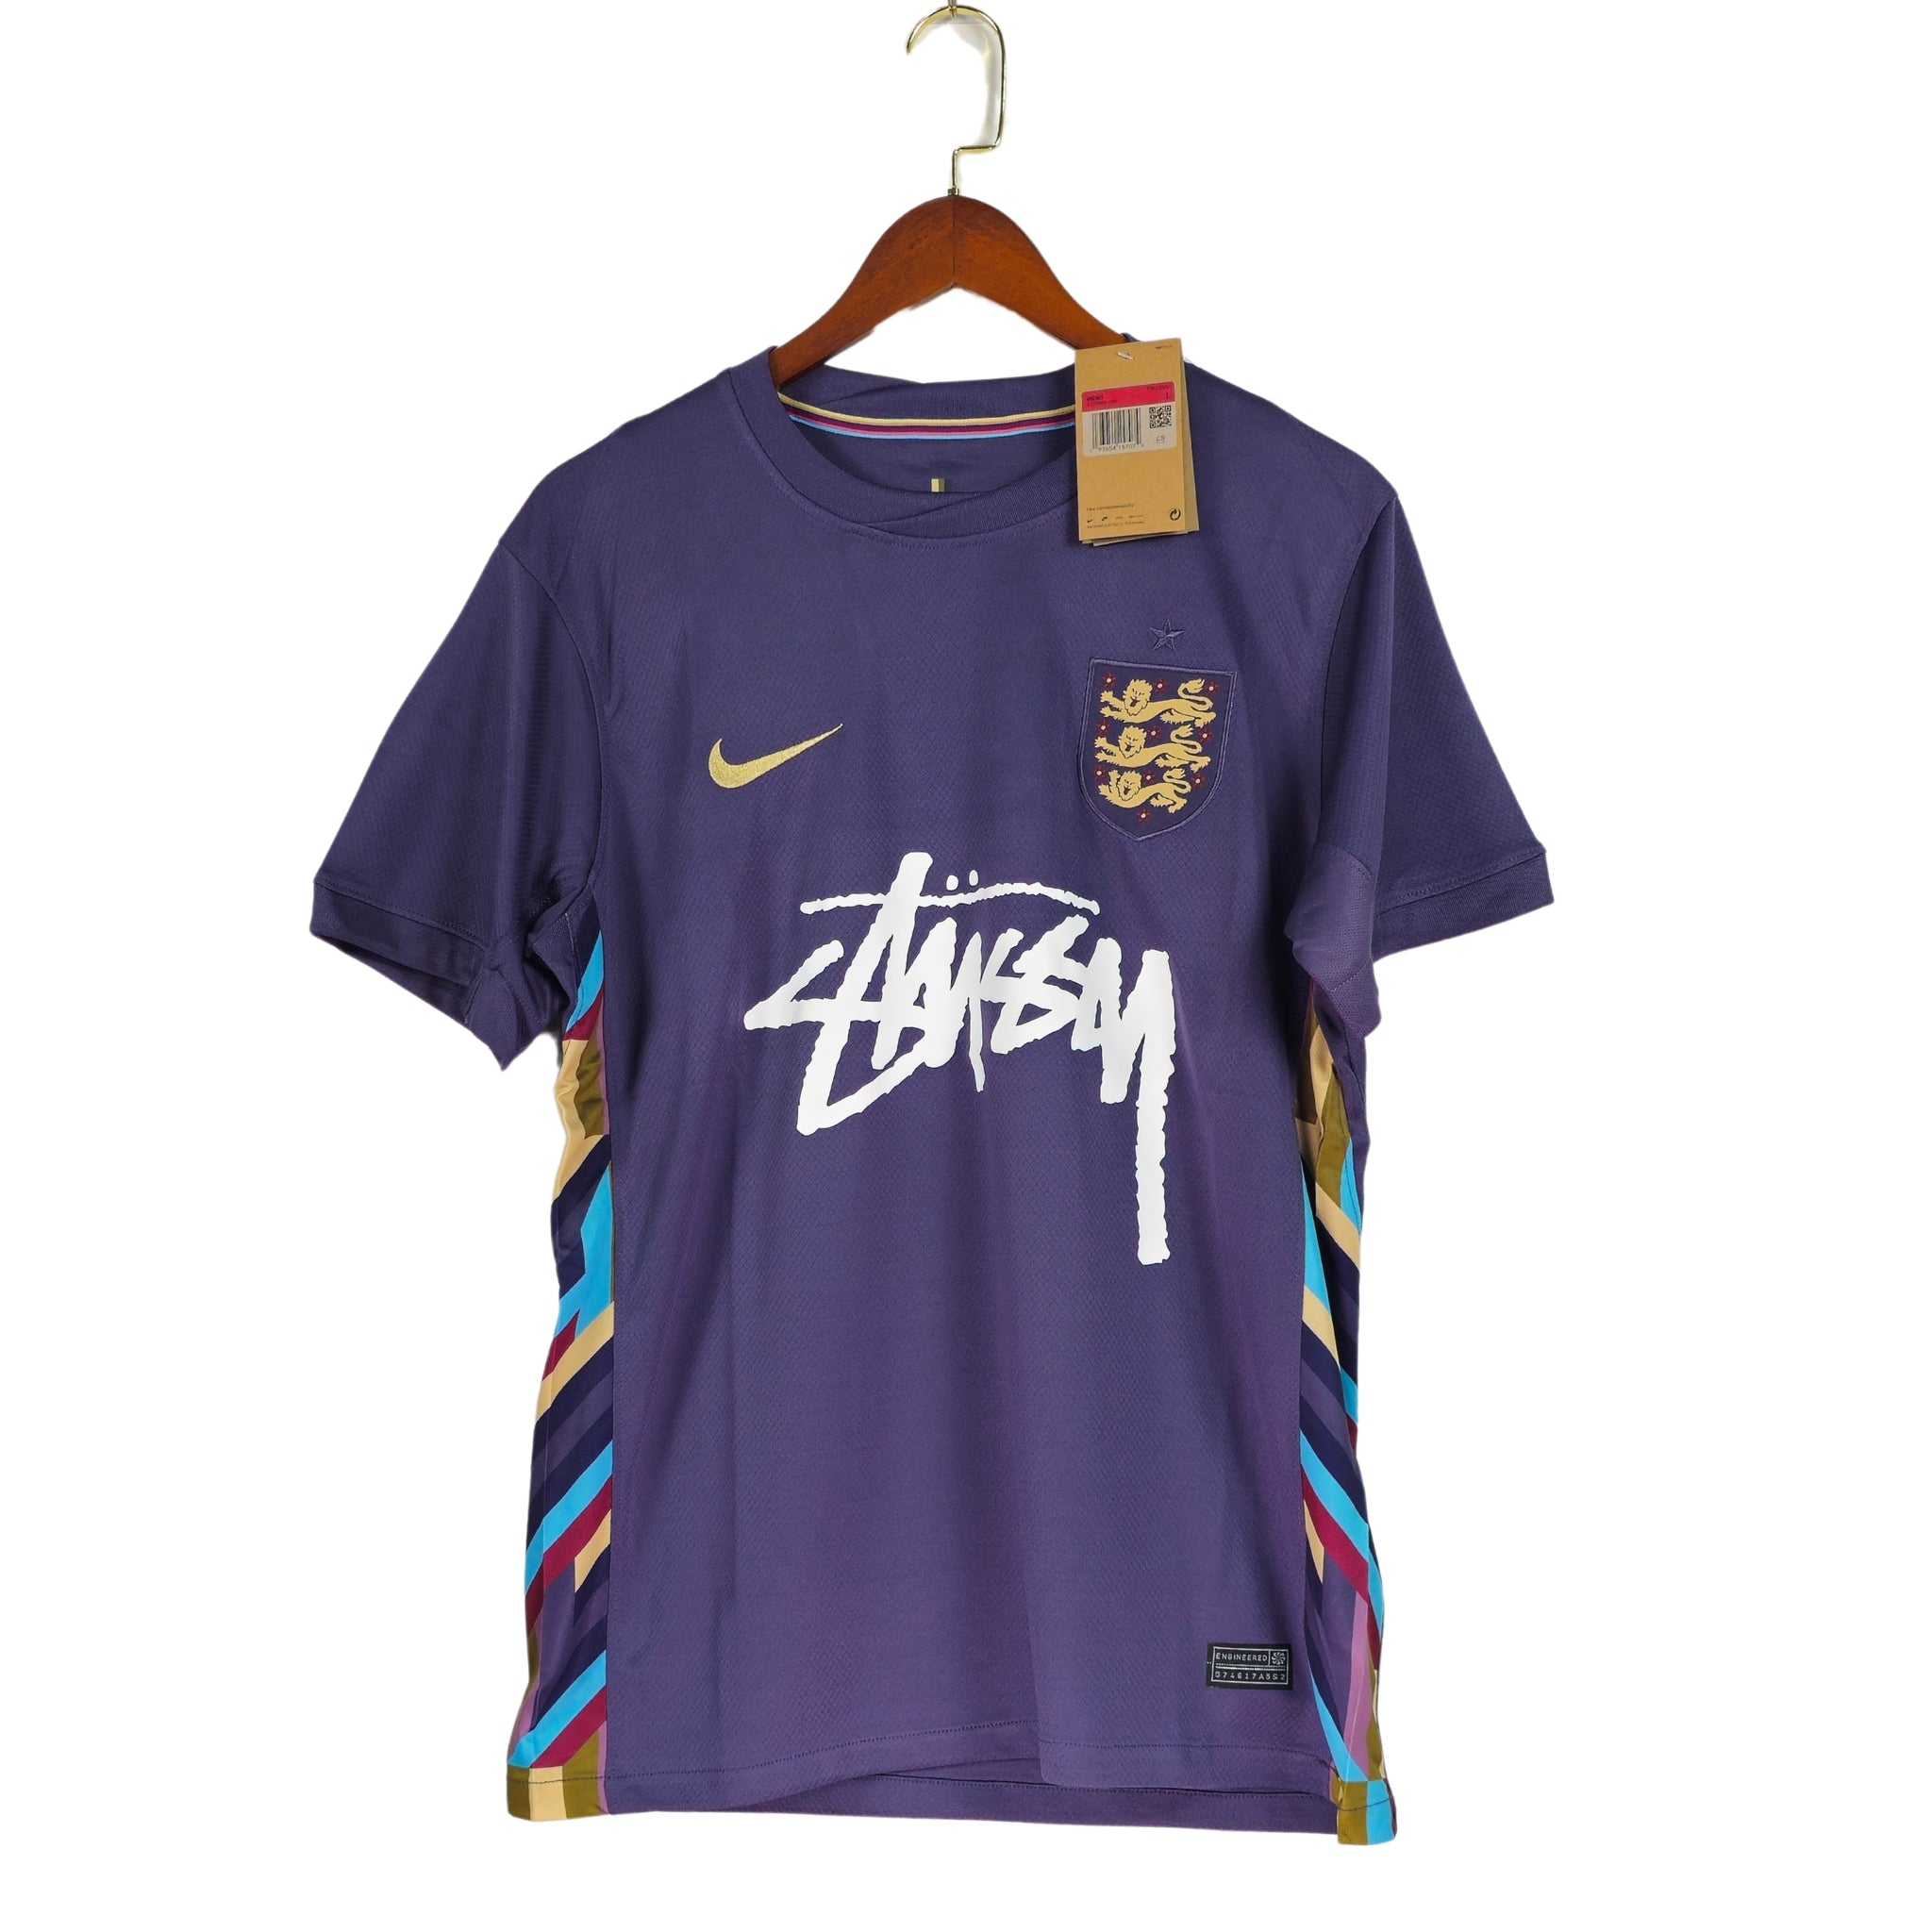 England X Stussy 24-25 | Special Edition